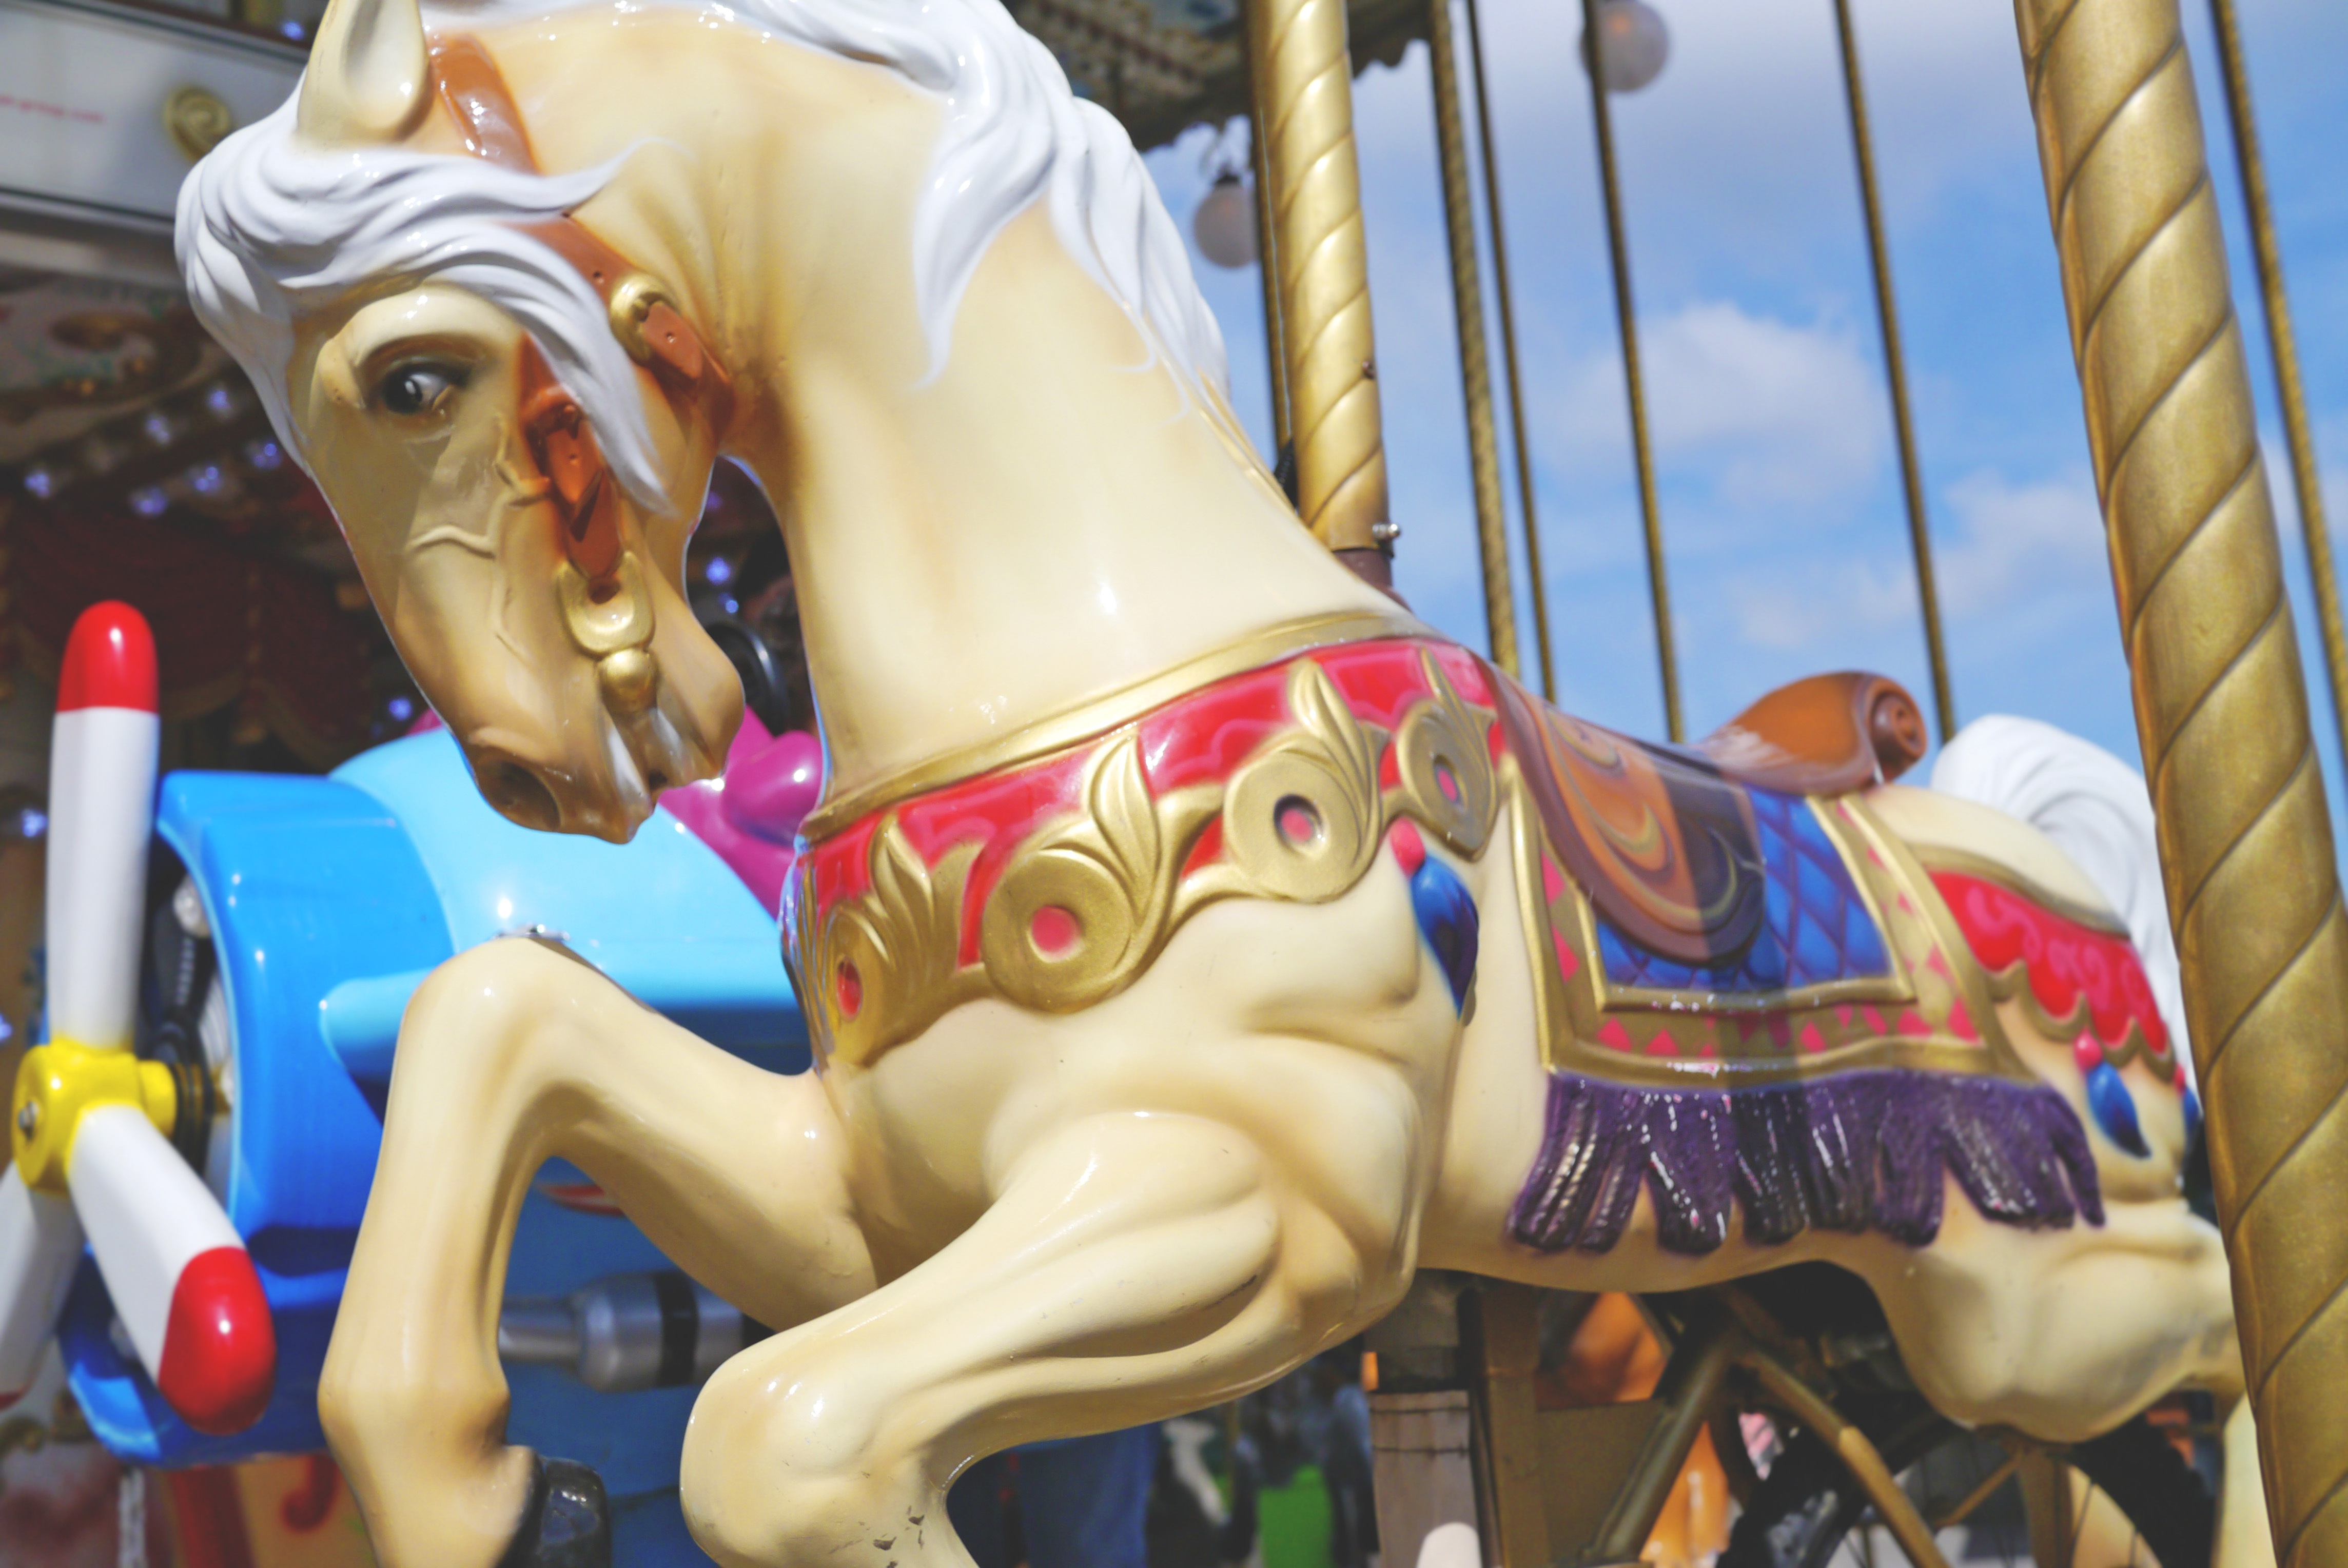 Carousel in the park photo